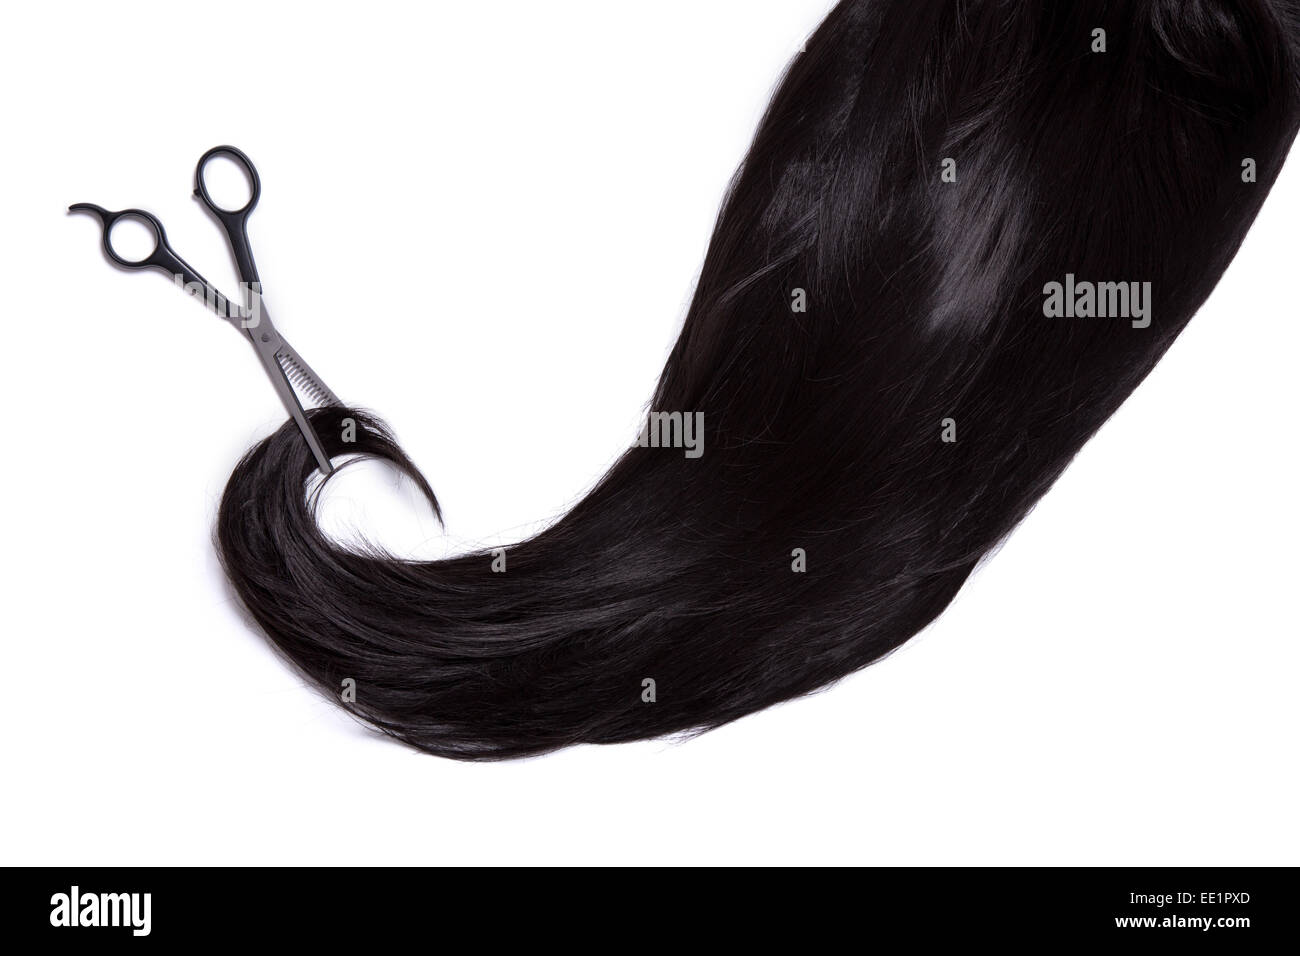 Long black hair with professional scissors, isolated on white background Stock Photo